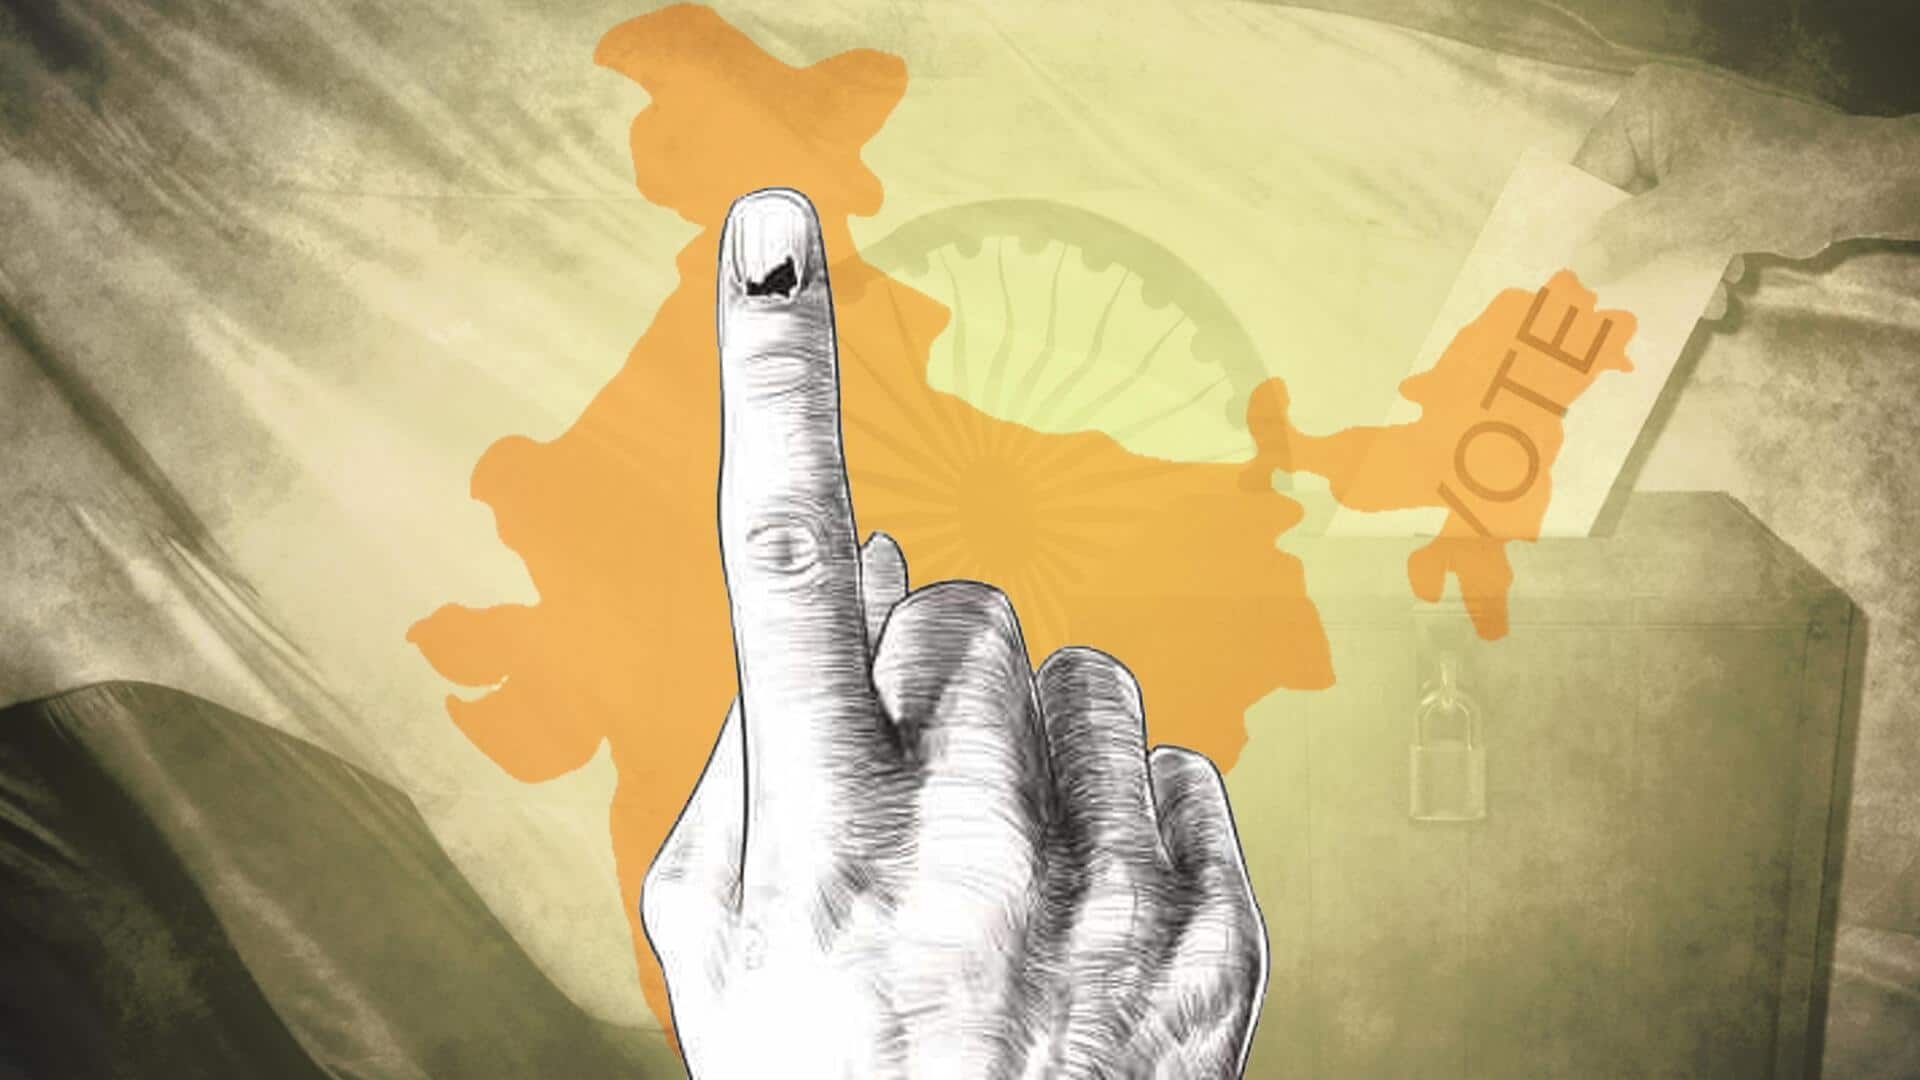 Phase 1 polling: 8 Union ministers, 2 ex-CMs, in fray